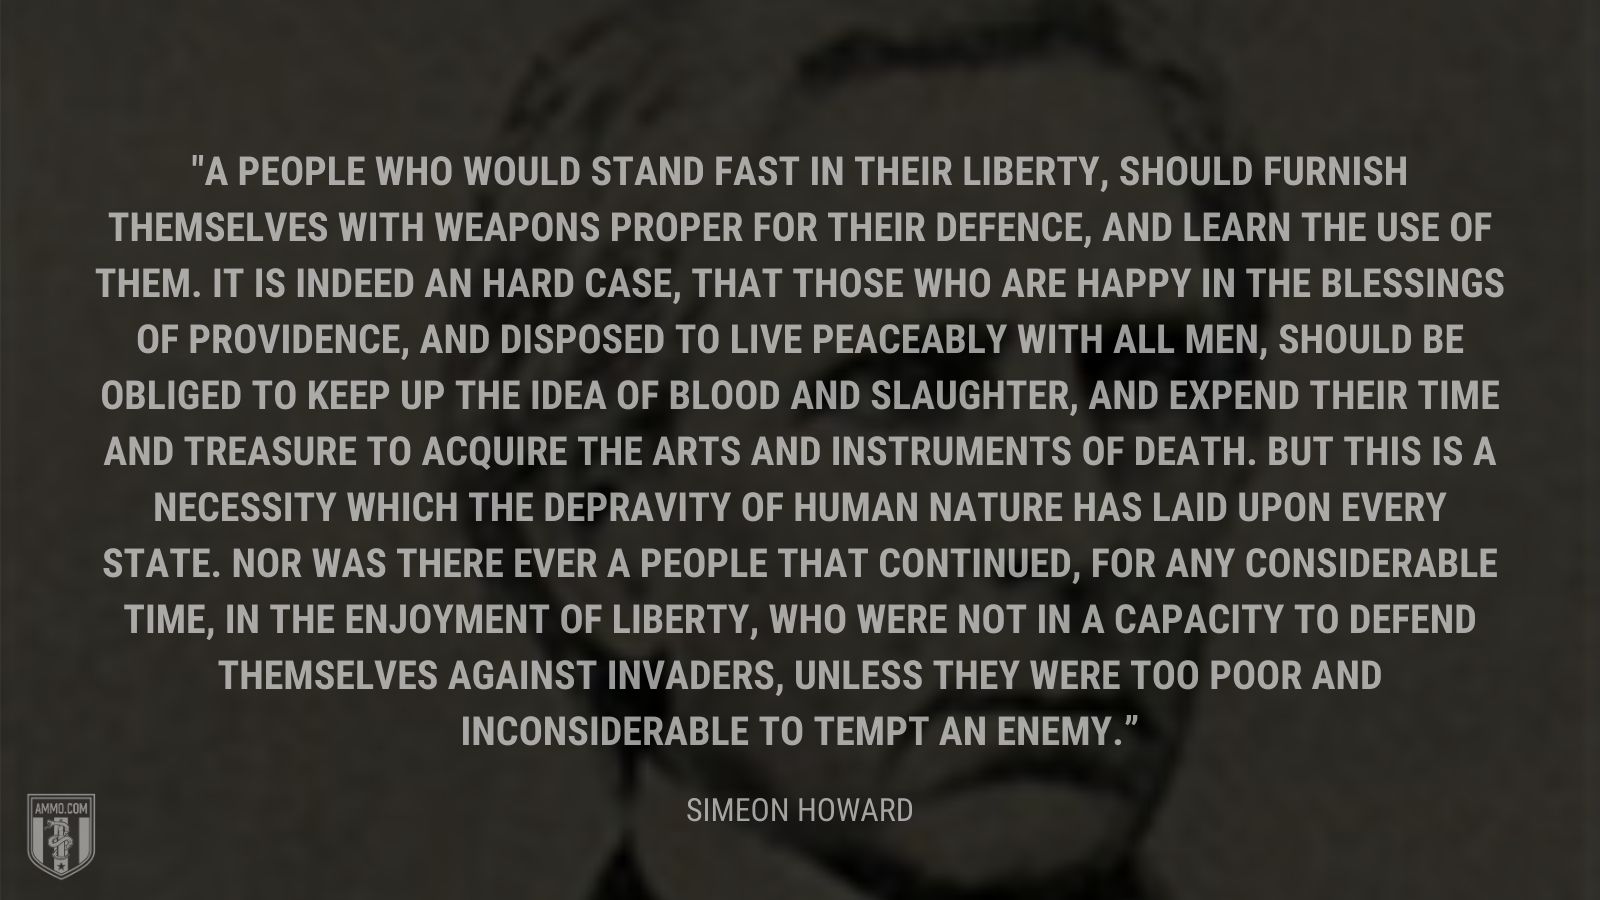 “A people who would stand fast in their liberty, should furnish themselves with weapons proper for their defence, and learn the use of them. It is indeed an hard case, that those who are happy in the blessings of providence, and disposed to live peaceably with all men, should be obliged to keep up the idea of blood and slaughter, and expend their time and treasure to acquire the arts and instruments of death. But this is a necessity which the depravity of human nature has laid upon every state. Nor was there ever a people that continued, for any considerable time, in the enjoyment of liberty, who were not in a capacity to defend themselves against invaders, unless they were too poor and inconsiderable to tempt an enemy.” - Simeon howard